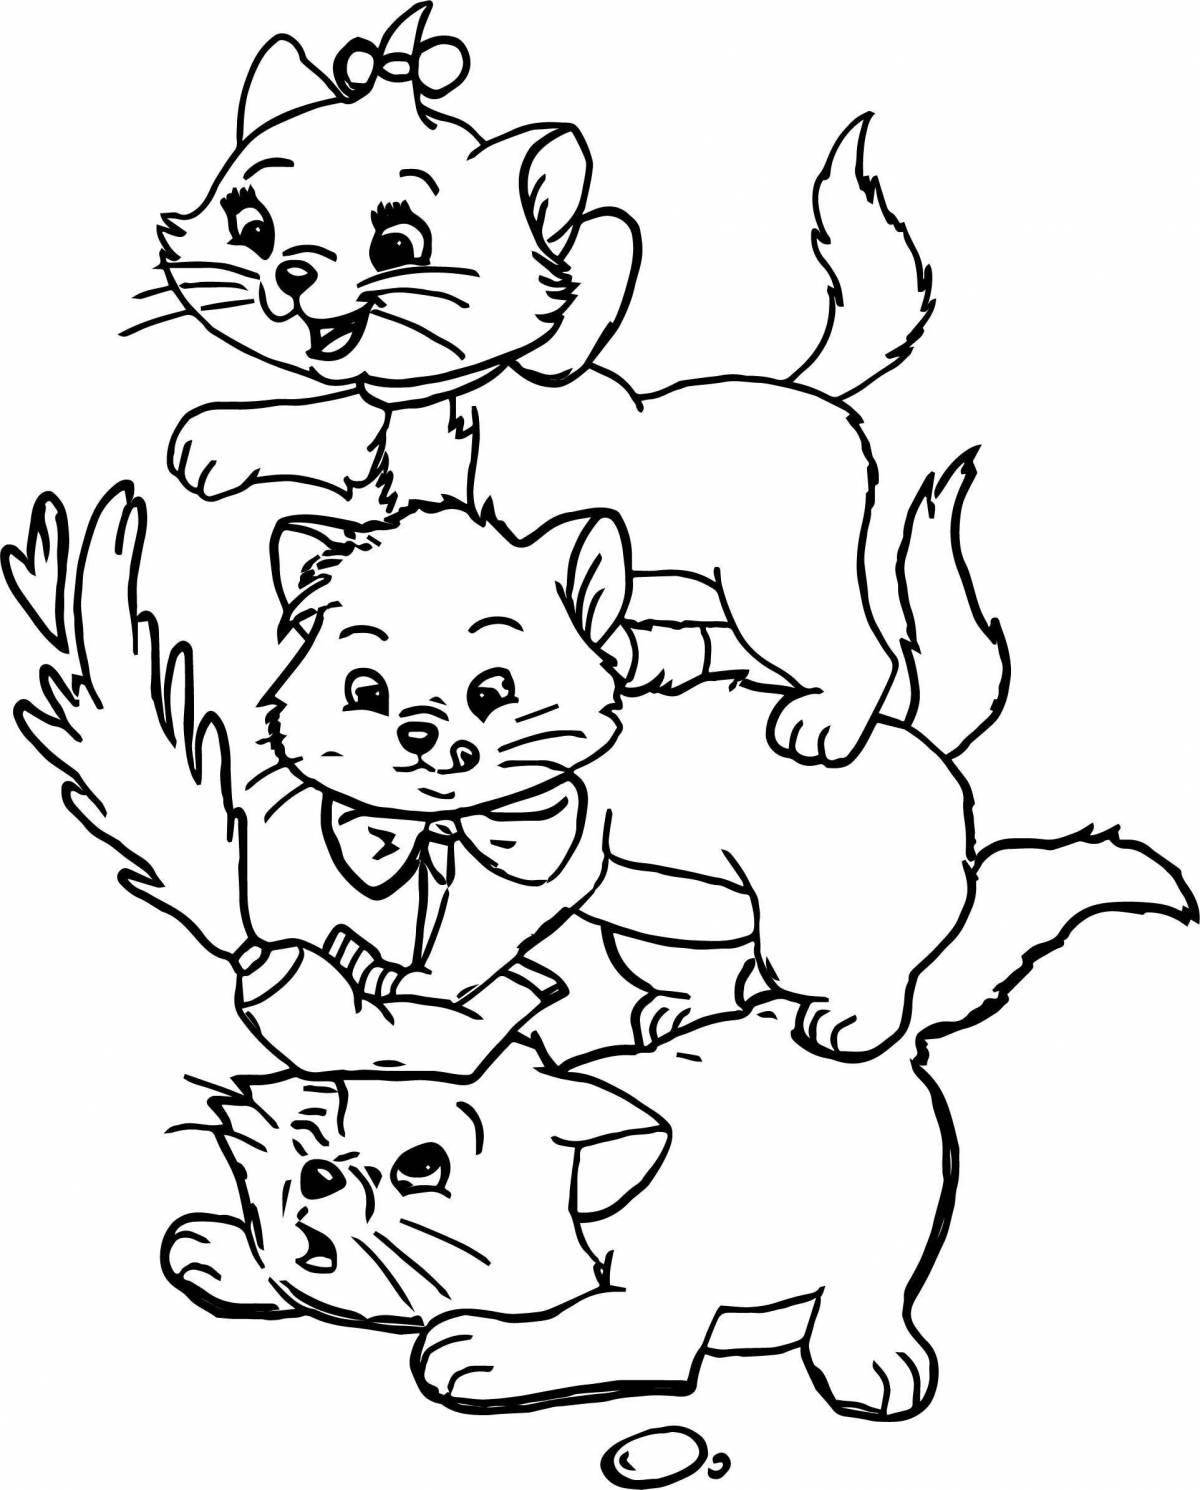 Coloring live kitten and puppy